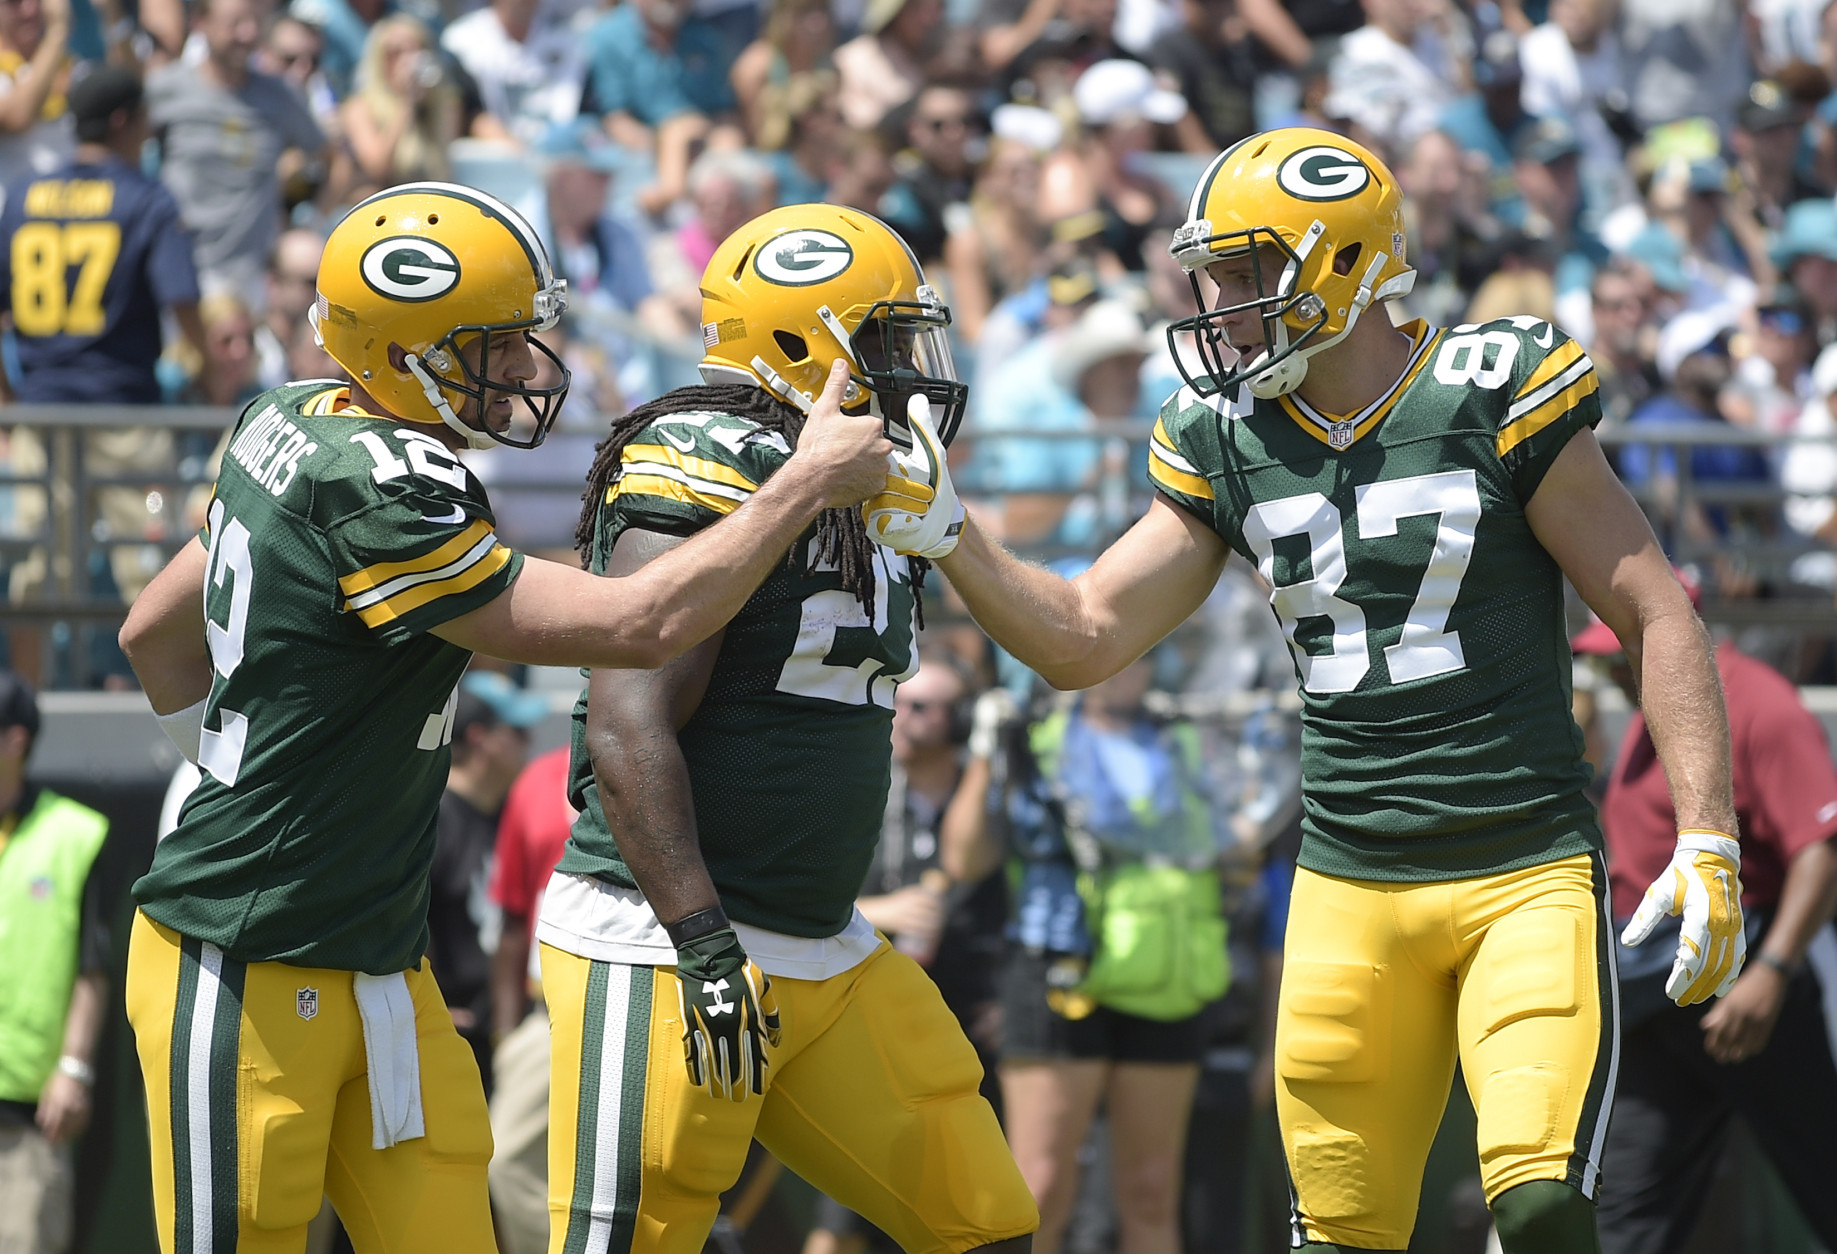 Green Bay Packers quarterback Aaron Rodgers celebrates his touchdown run against the Jacksonville Jaguars with wide receiver Jordy Nelson (87) during the first half of an NFL football game in Jacksonville, Fla., Sunday, Sept. 11, 2016.(AP Photo/Phelan M. Ebenhack)